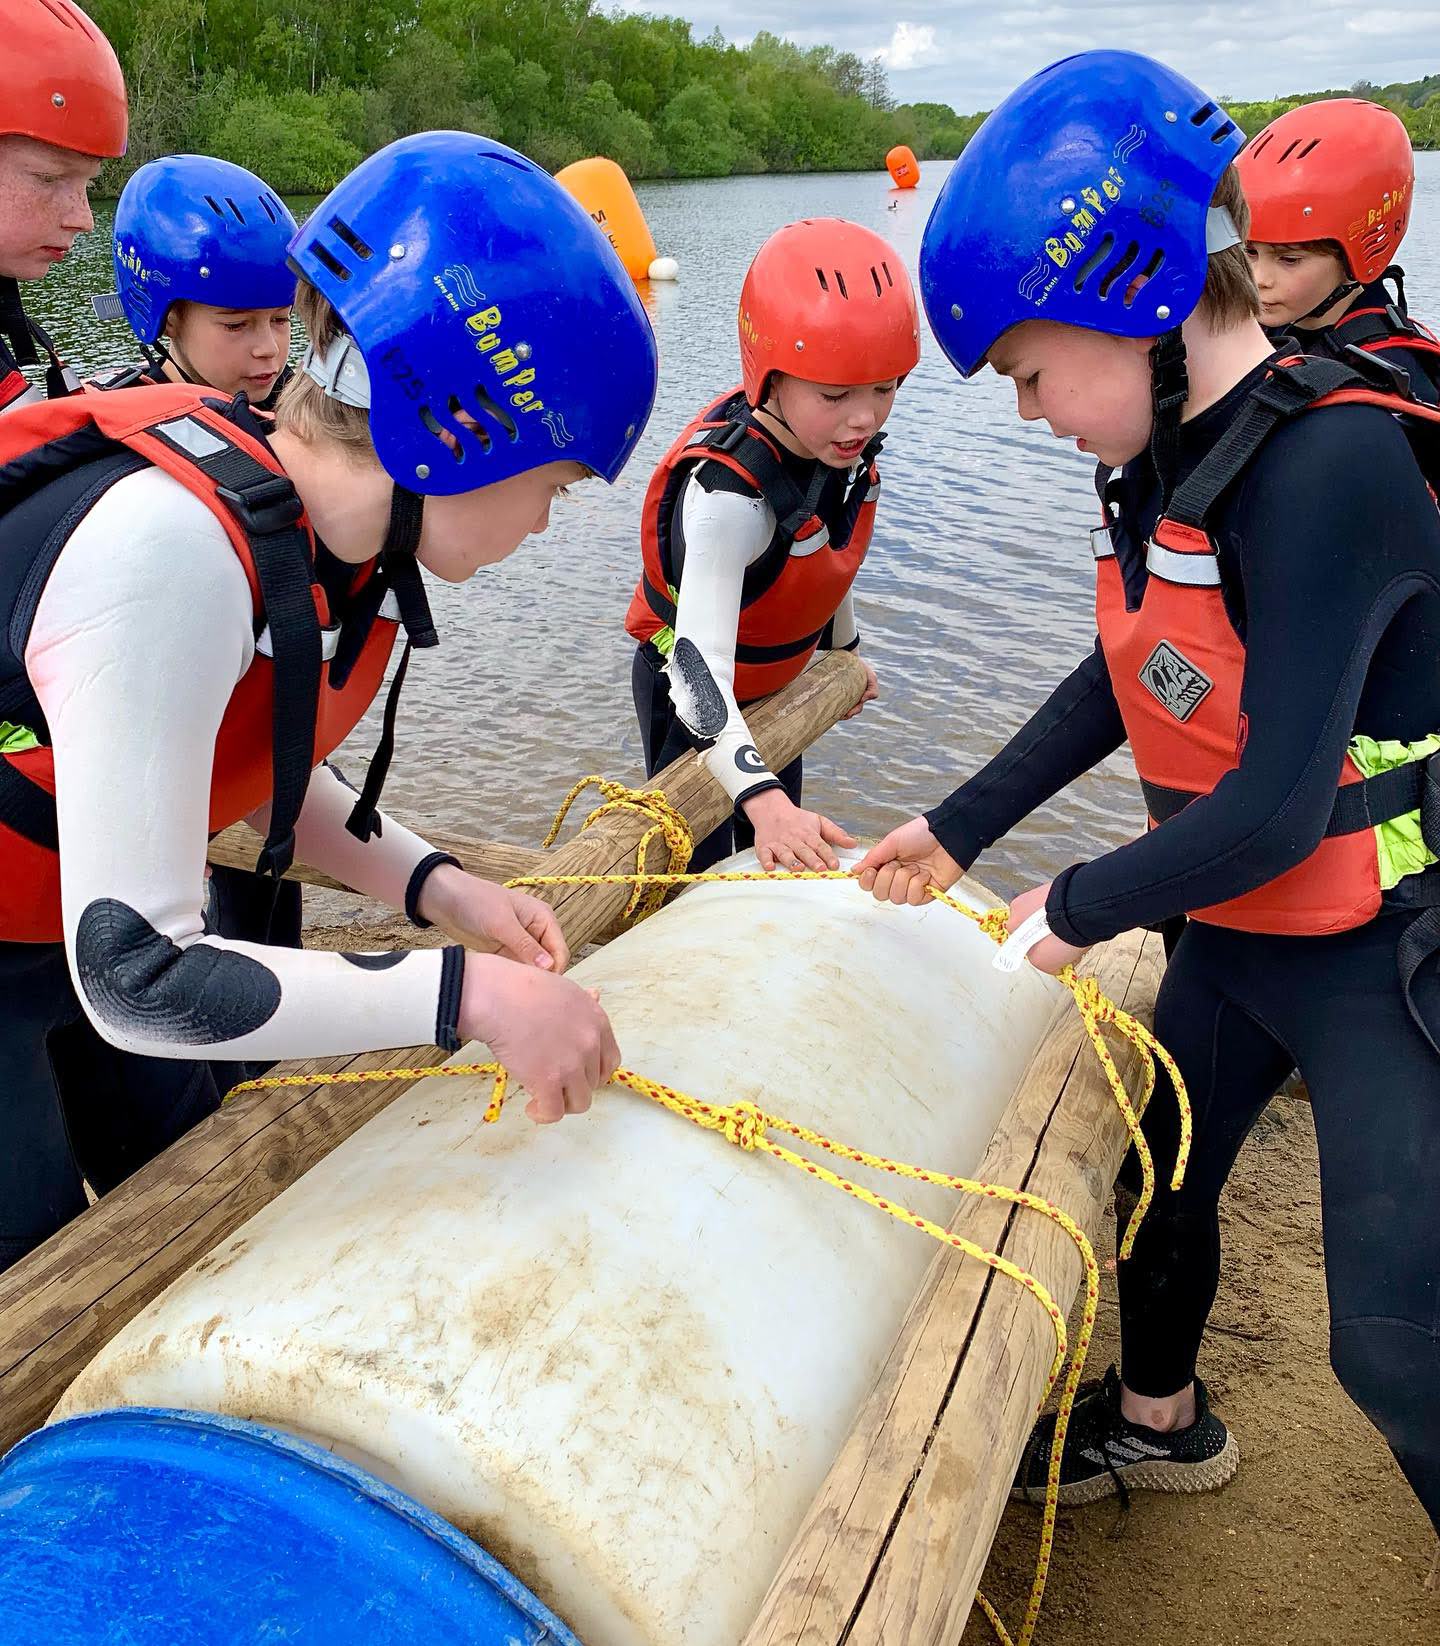 Team building exercise to build a raft